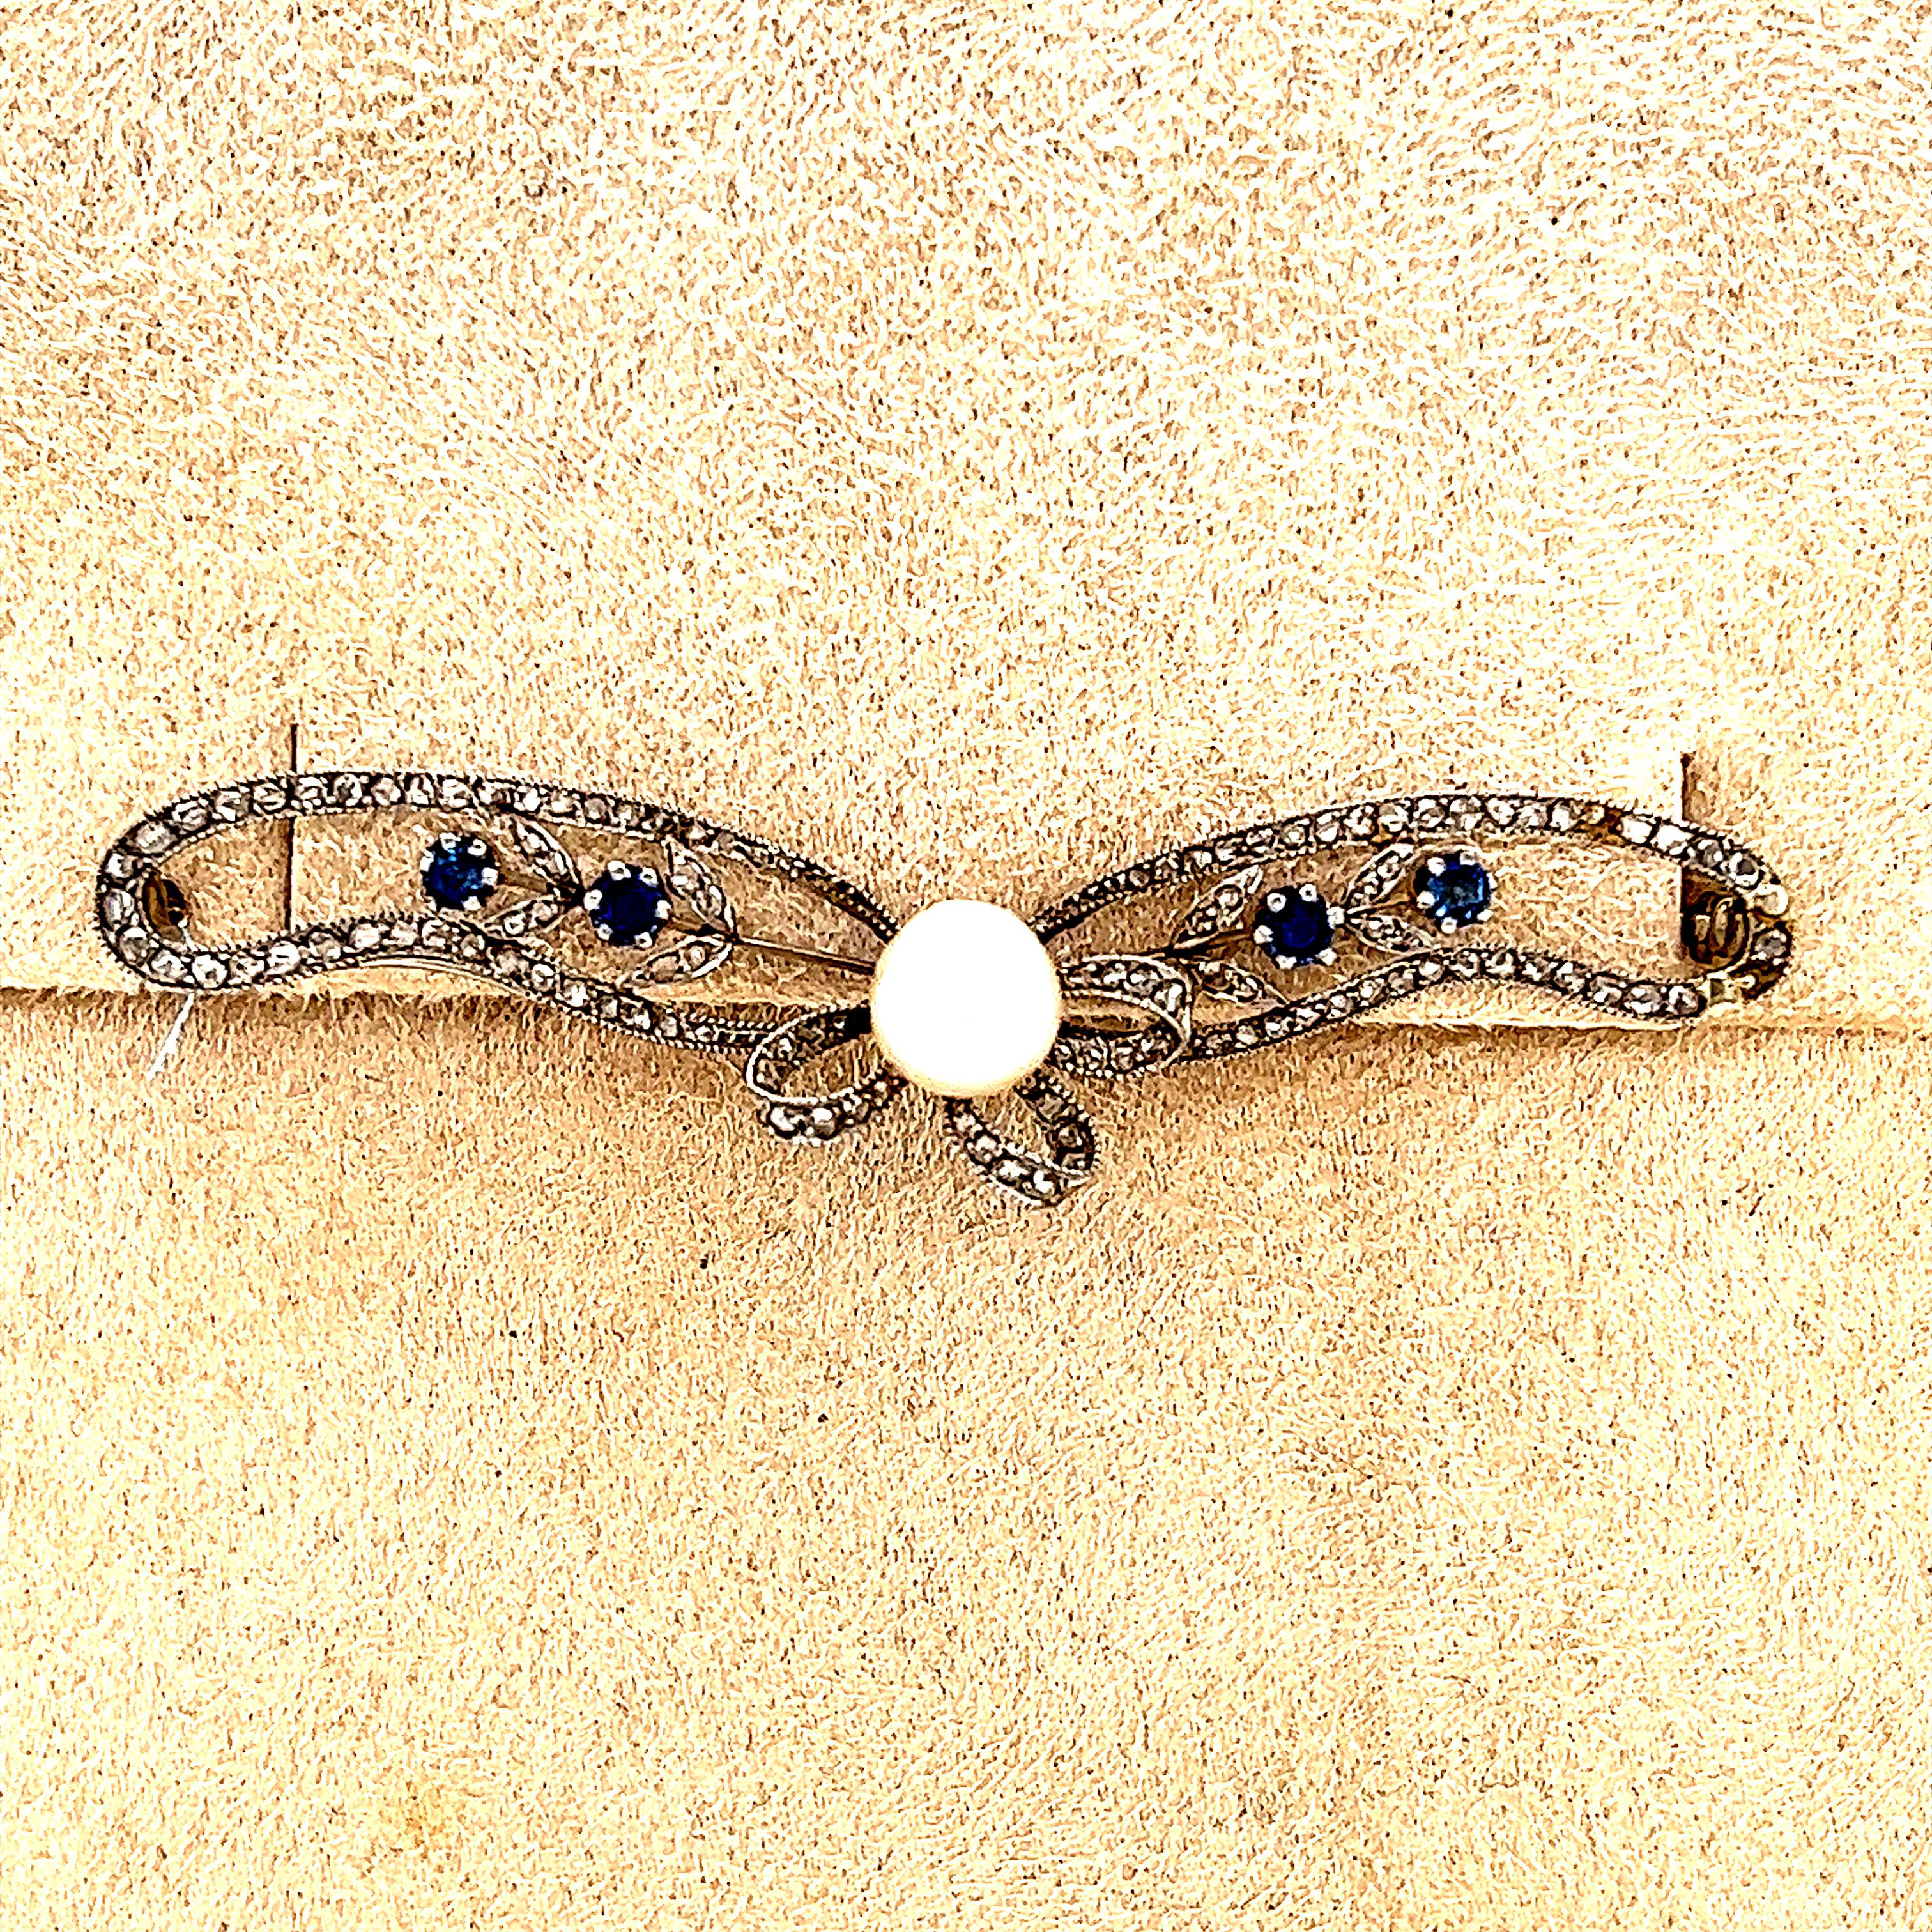 Belle Epoque Platinum Ribbon Brooch with Pearl Diamonds & Sapphires In Good Condition For Sale In MIAMI, FL